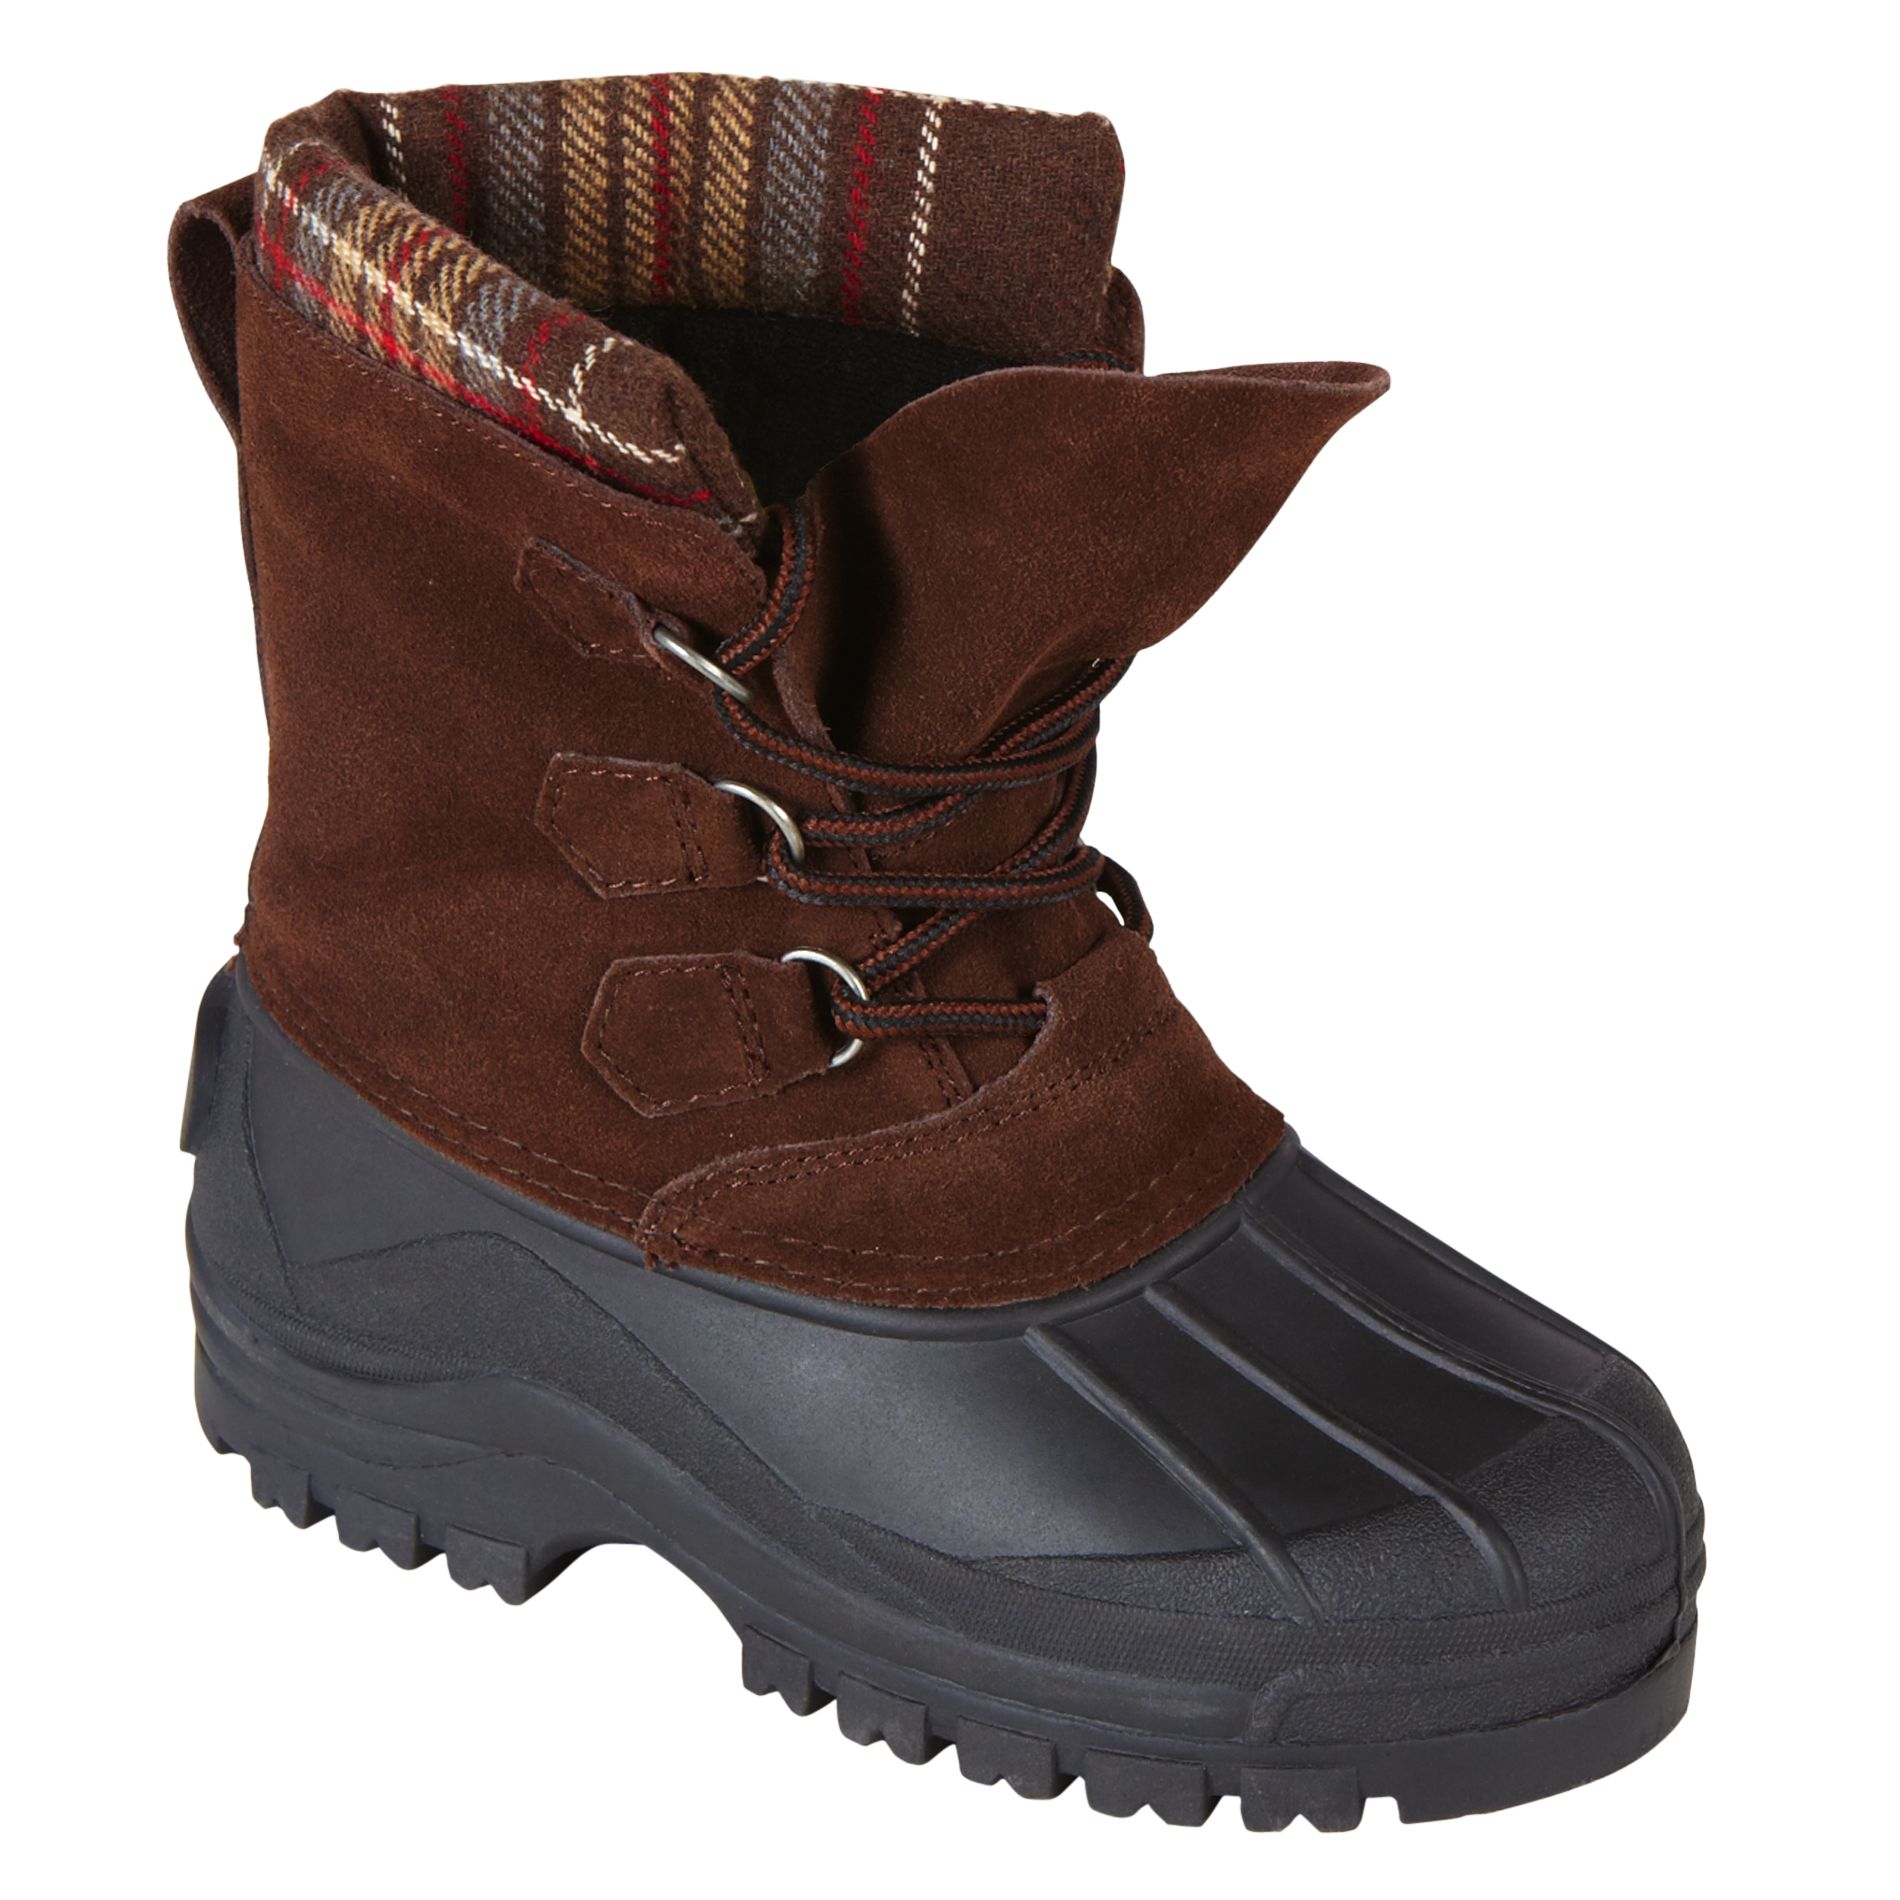 Athletech Boy's Quack3 Leather Winter Lace Up Hiker - Brown